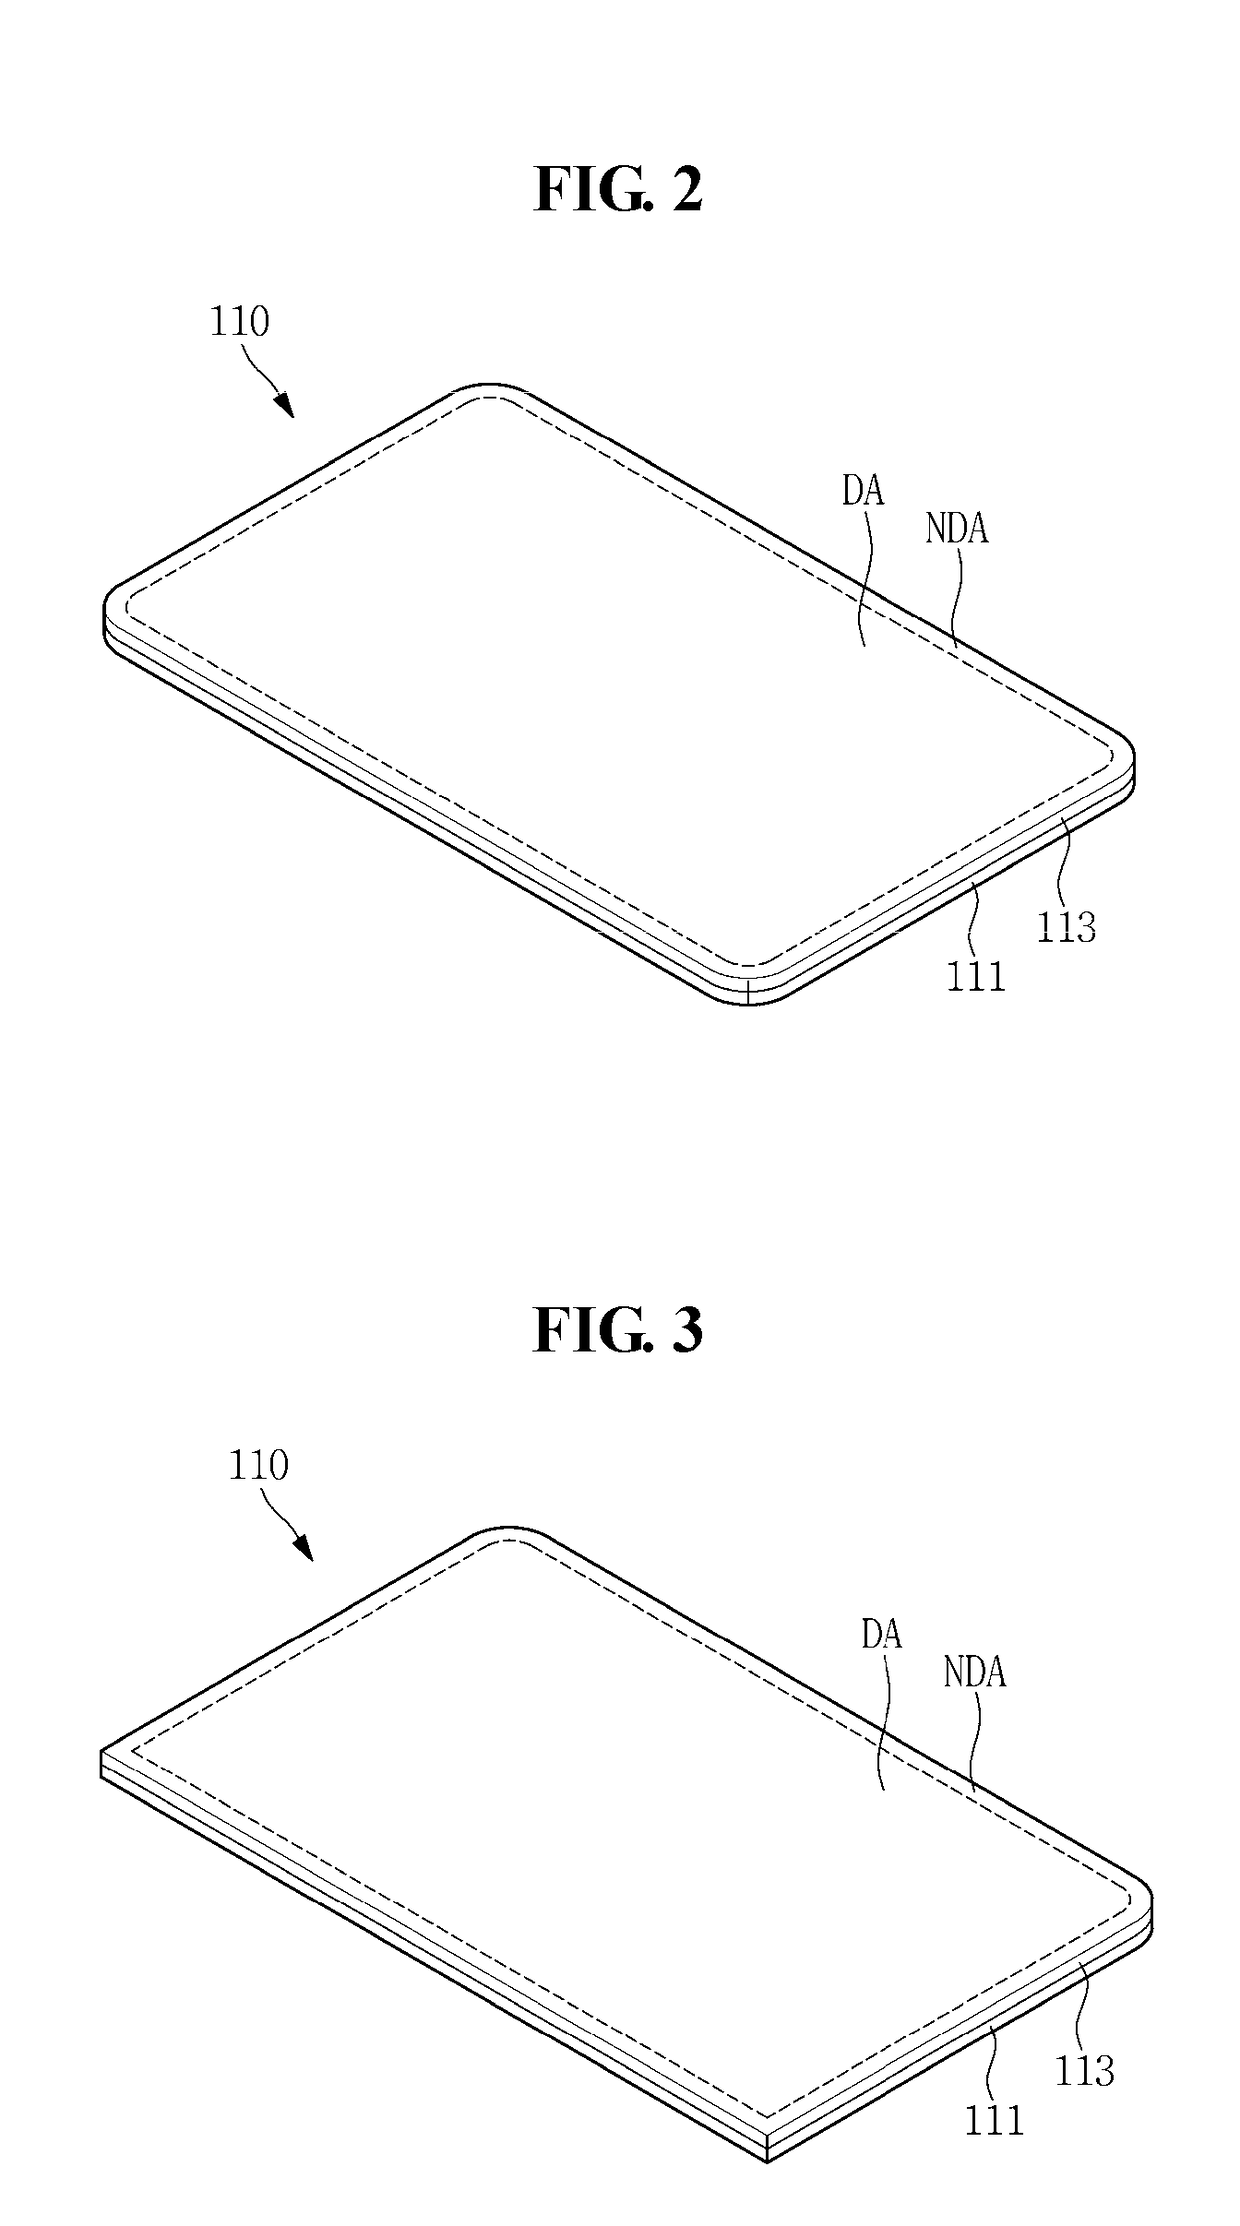 Display device having a non-rectilinear display area